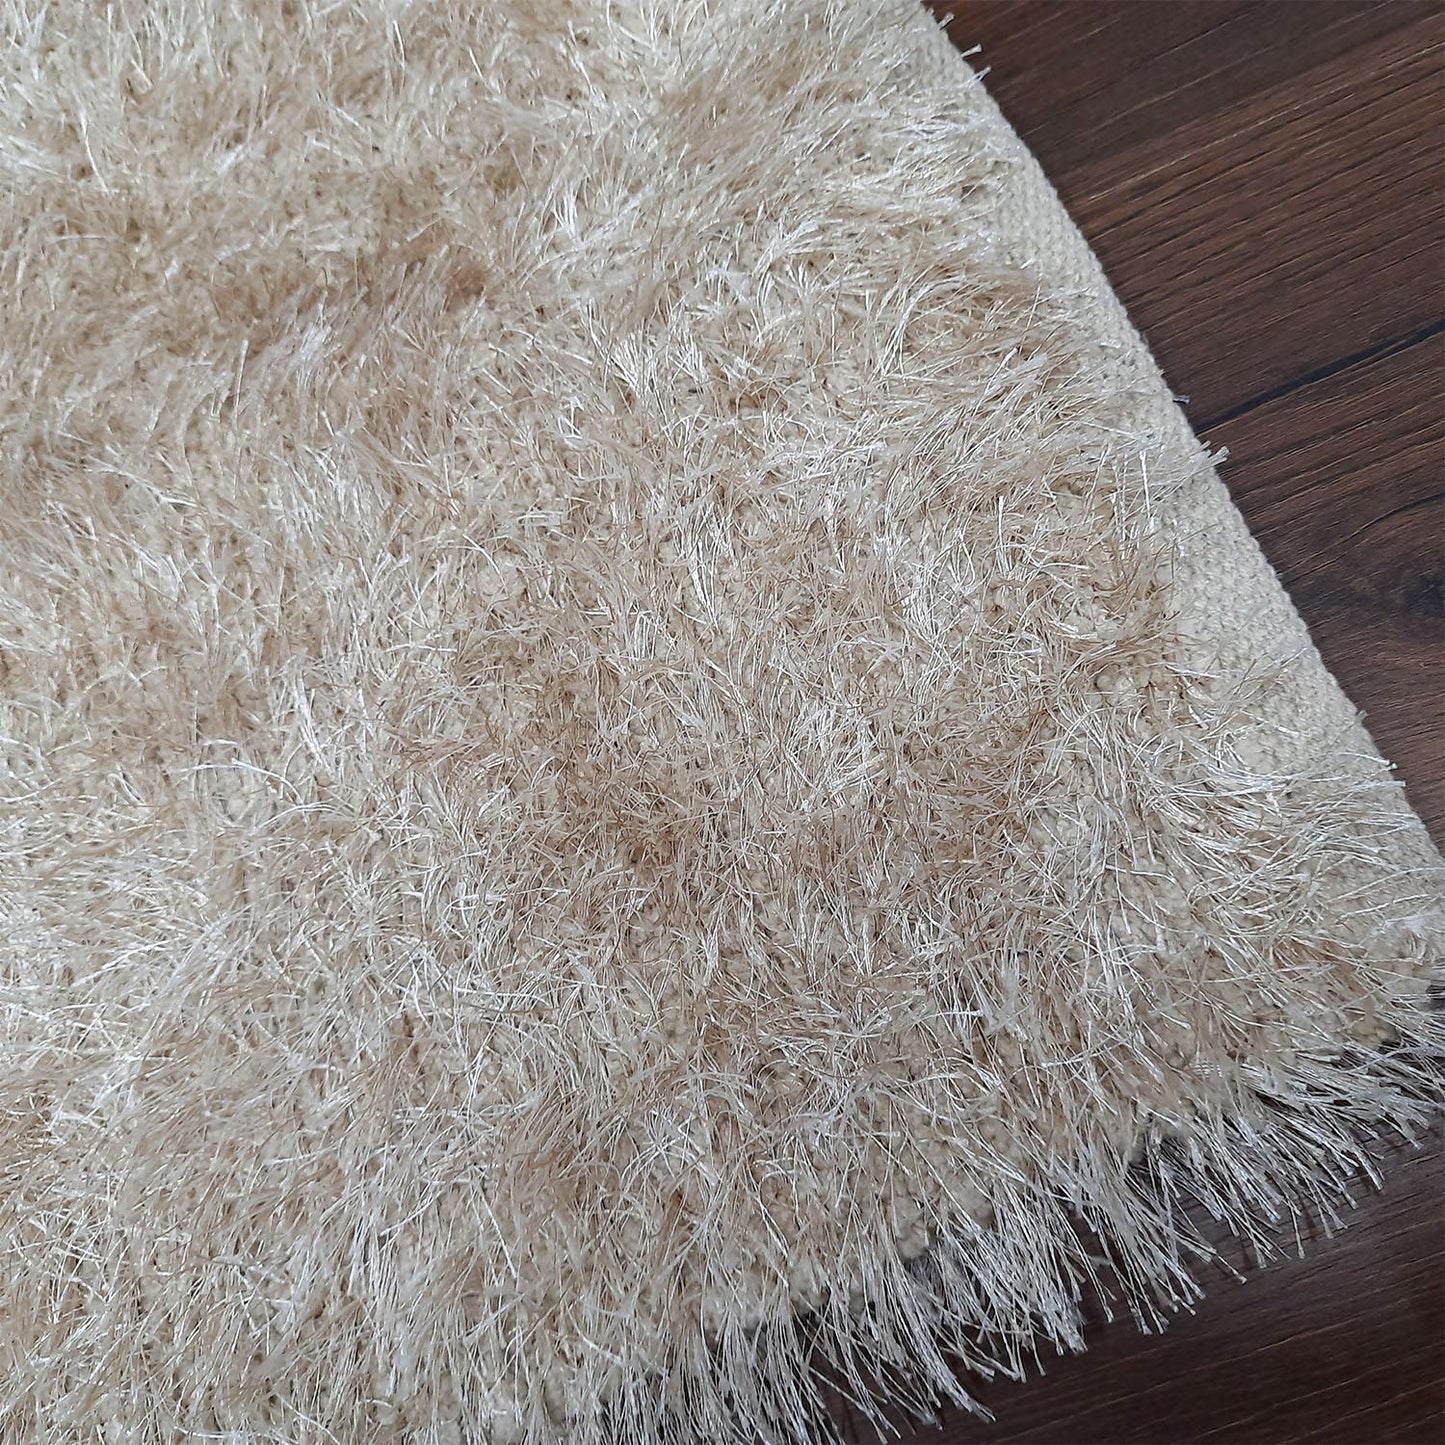 Fur Durry For Living Room|Beige|Reversible – Both sides same, Washable By Avioni